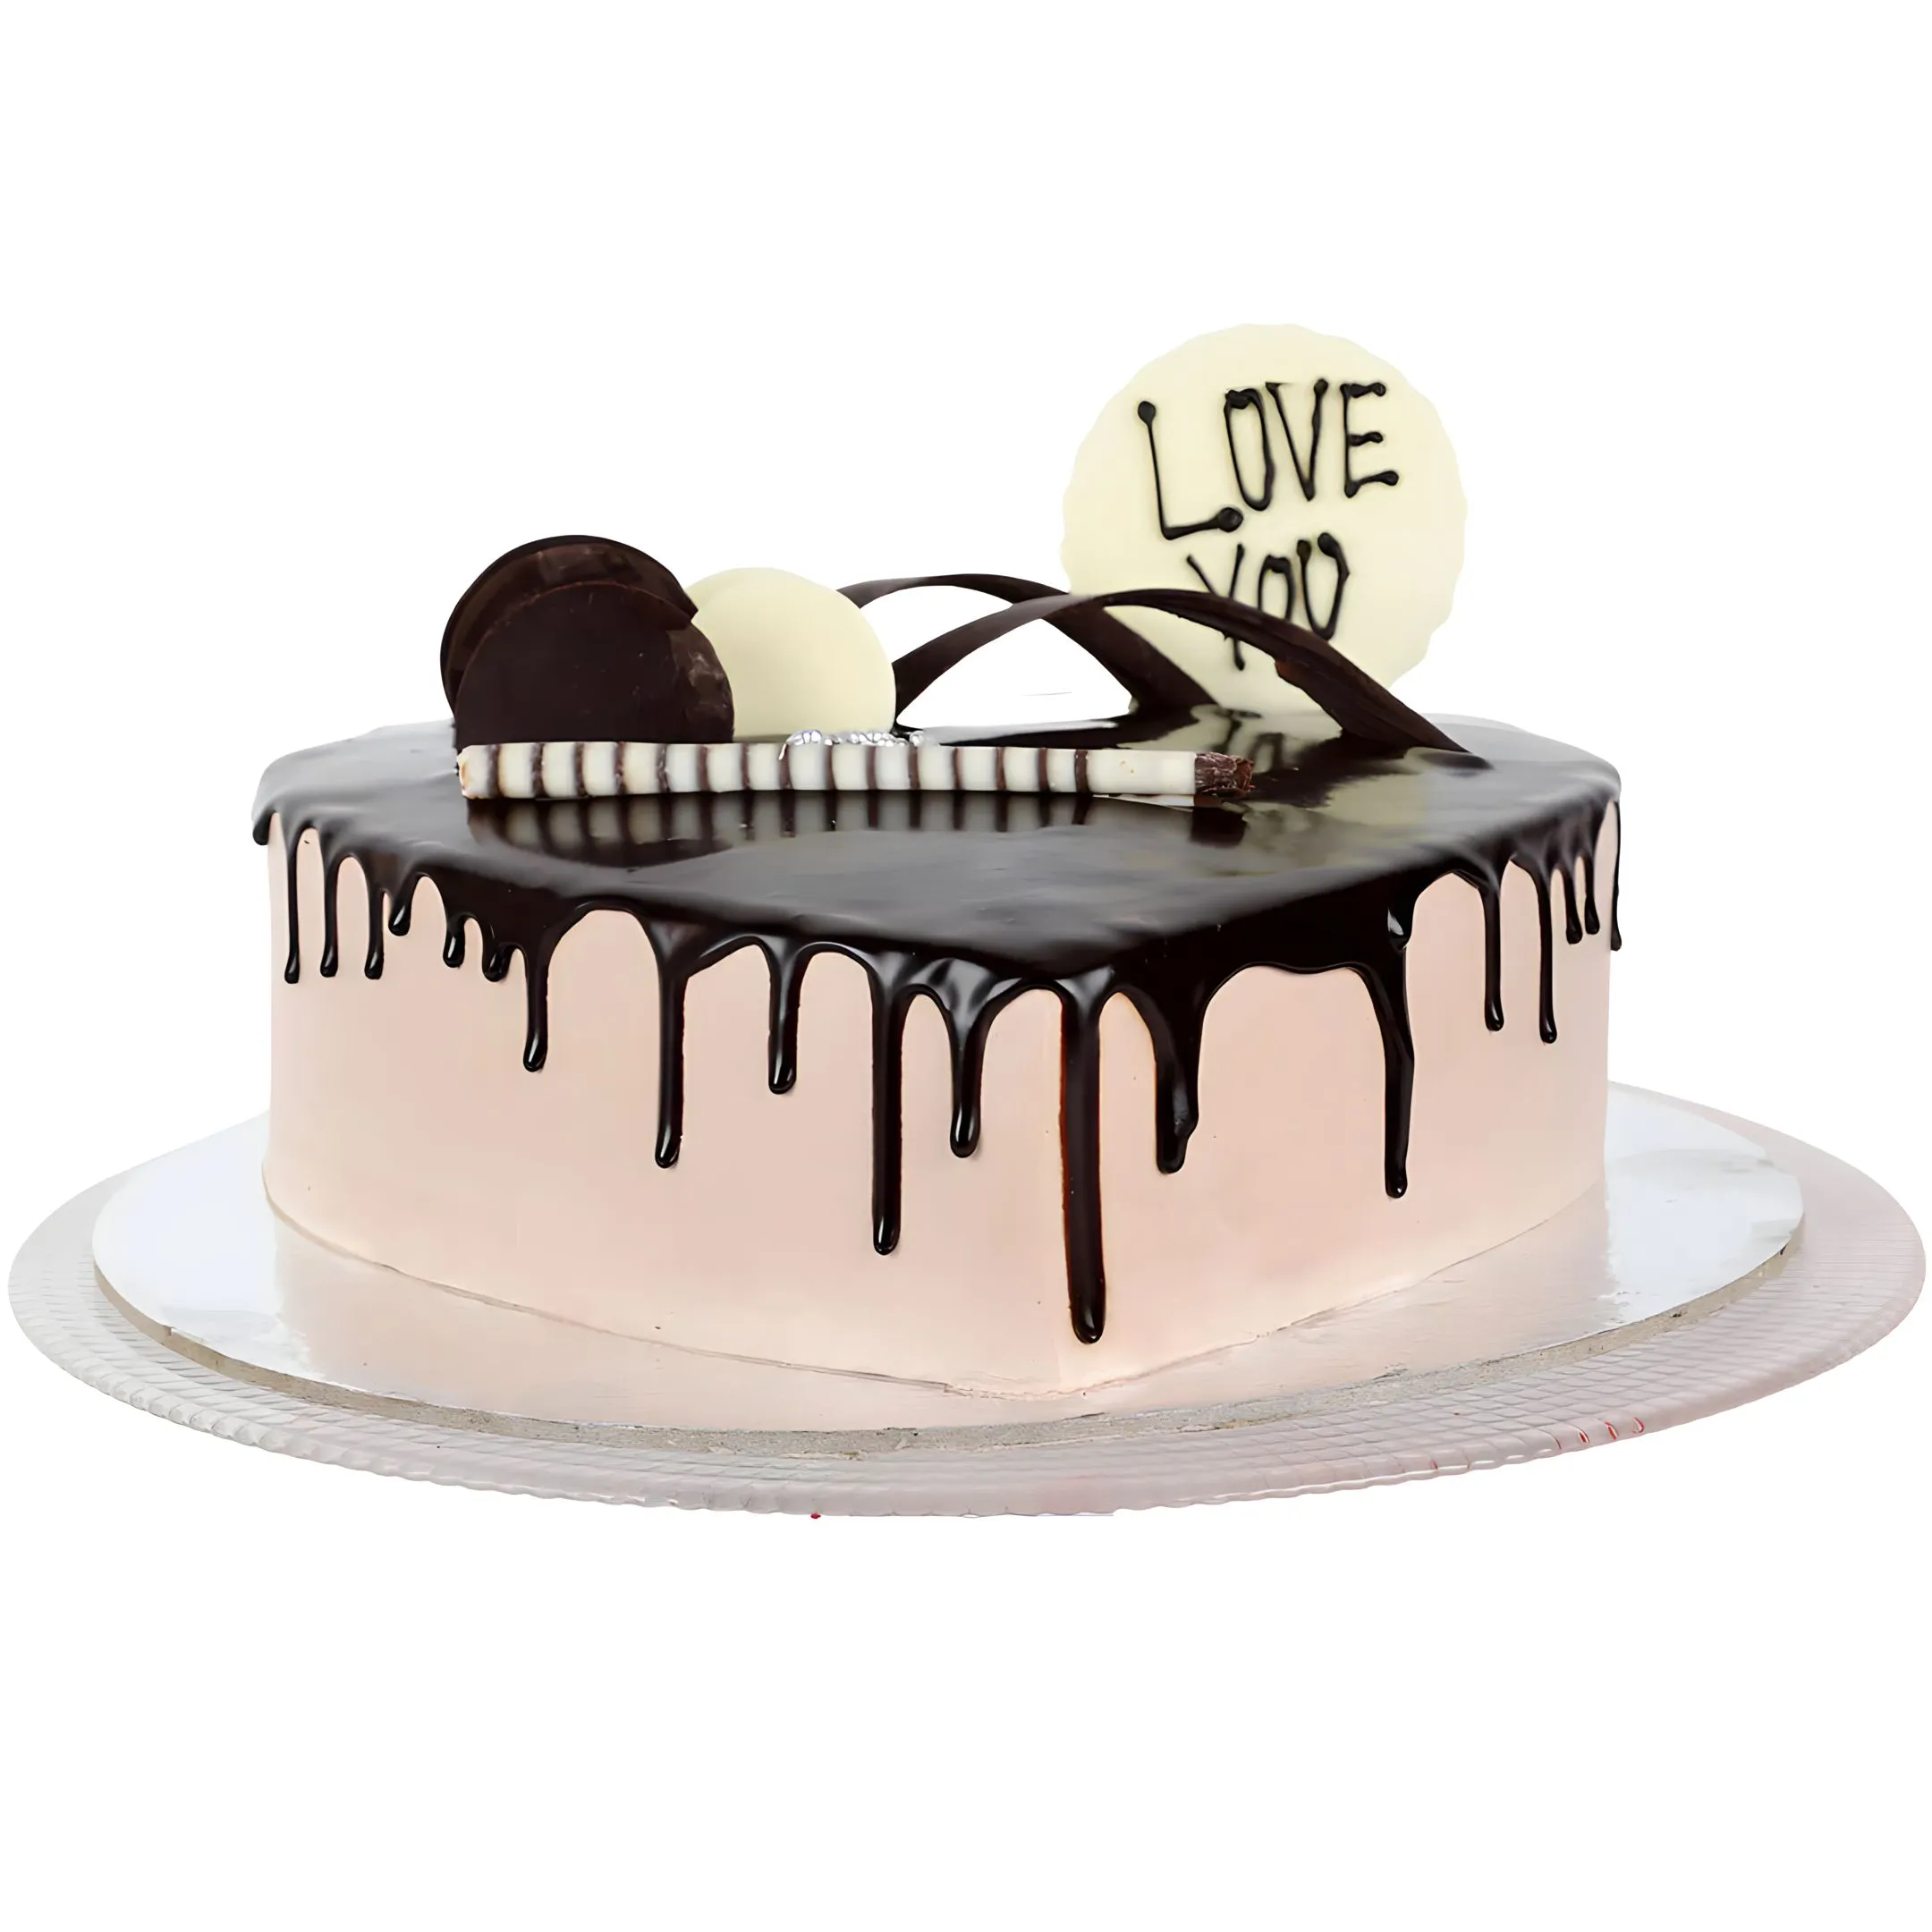 Delicious Heart Shaped Chocolate Eggless Cake